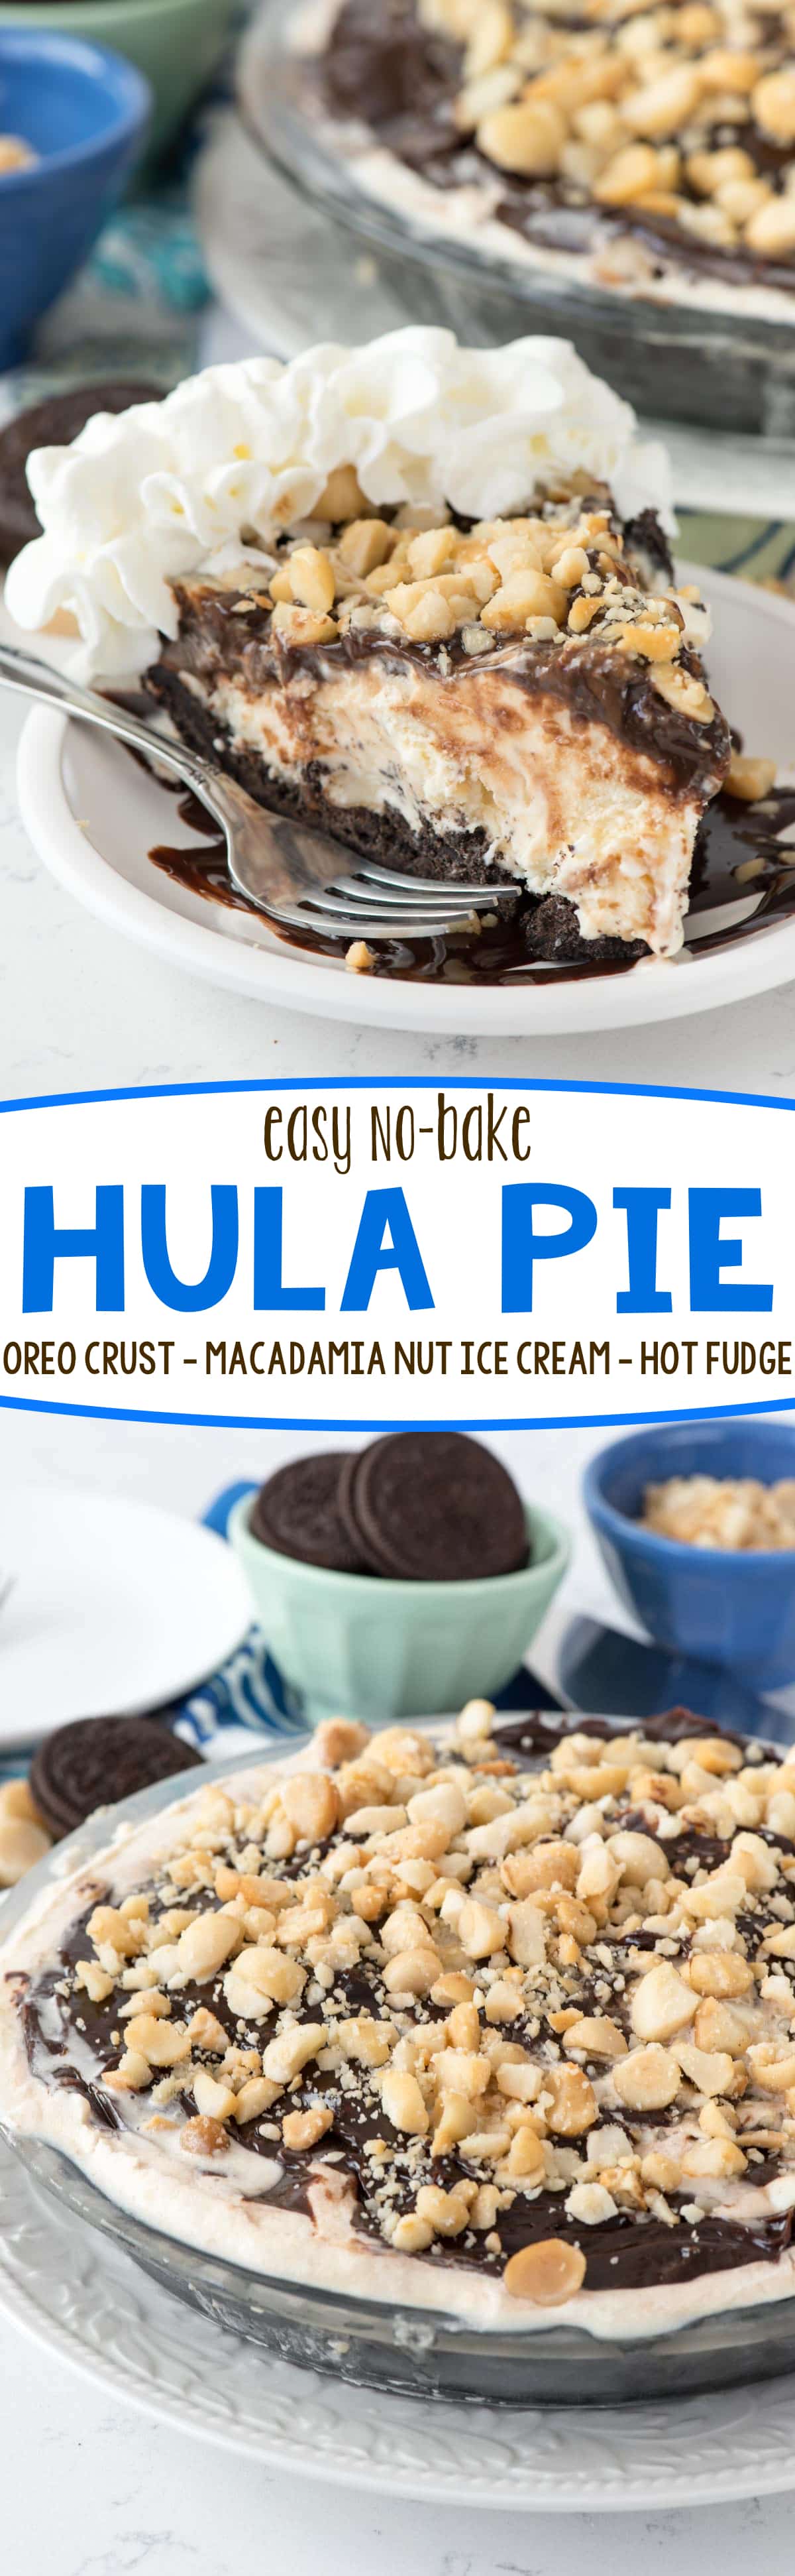 Easy No Bake Hula Pie Recipe - an easy no bake pie with an Oreo crust, macadamia nut ice cream, and hot fudge! No one could stop eating this pie!